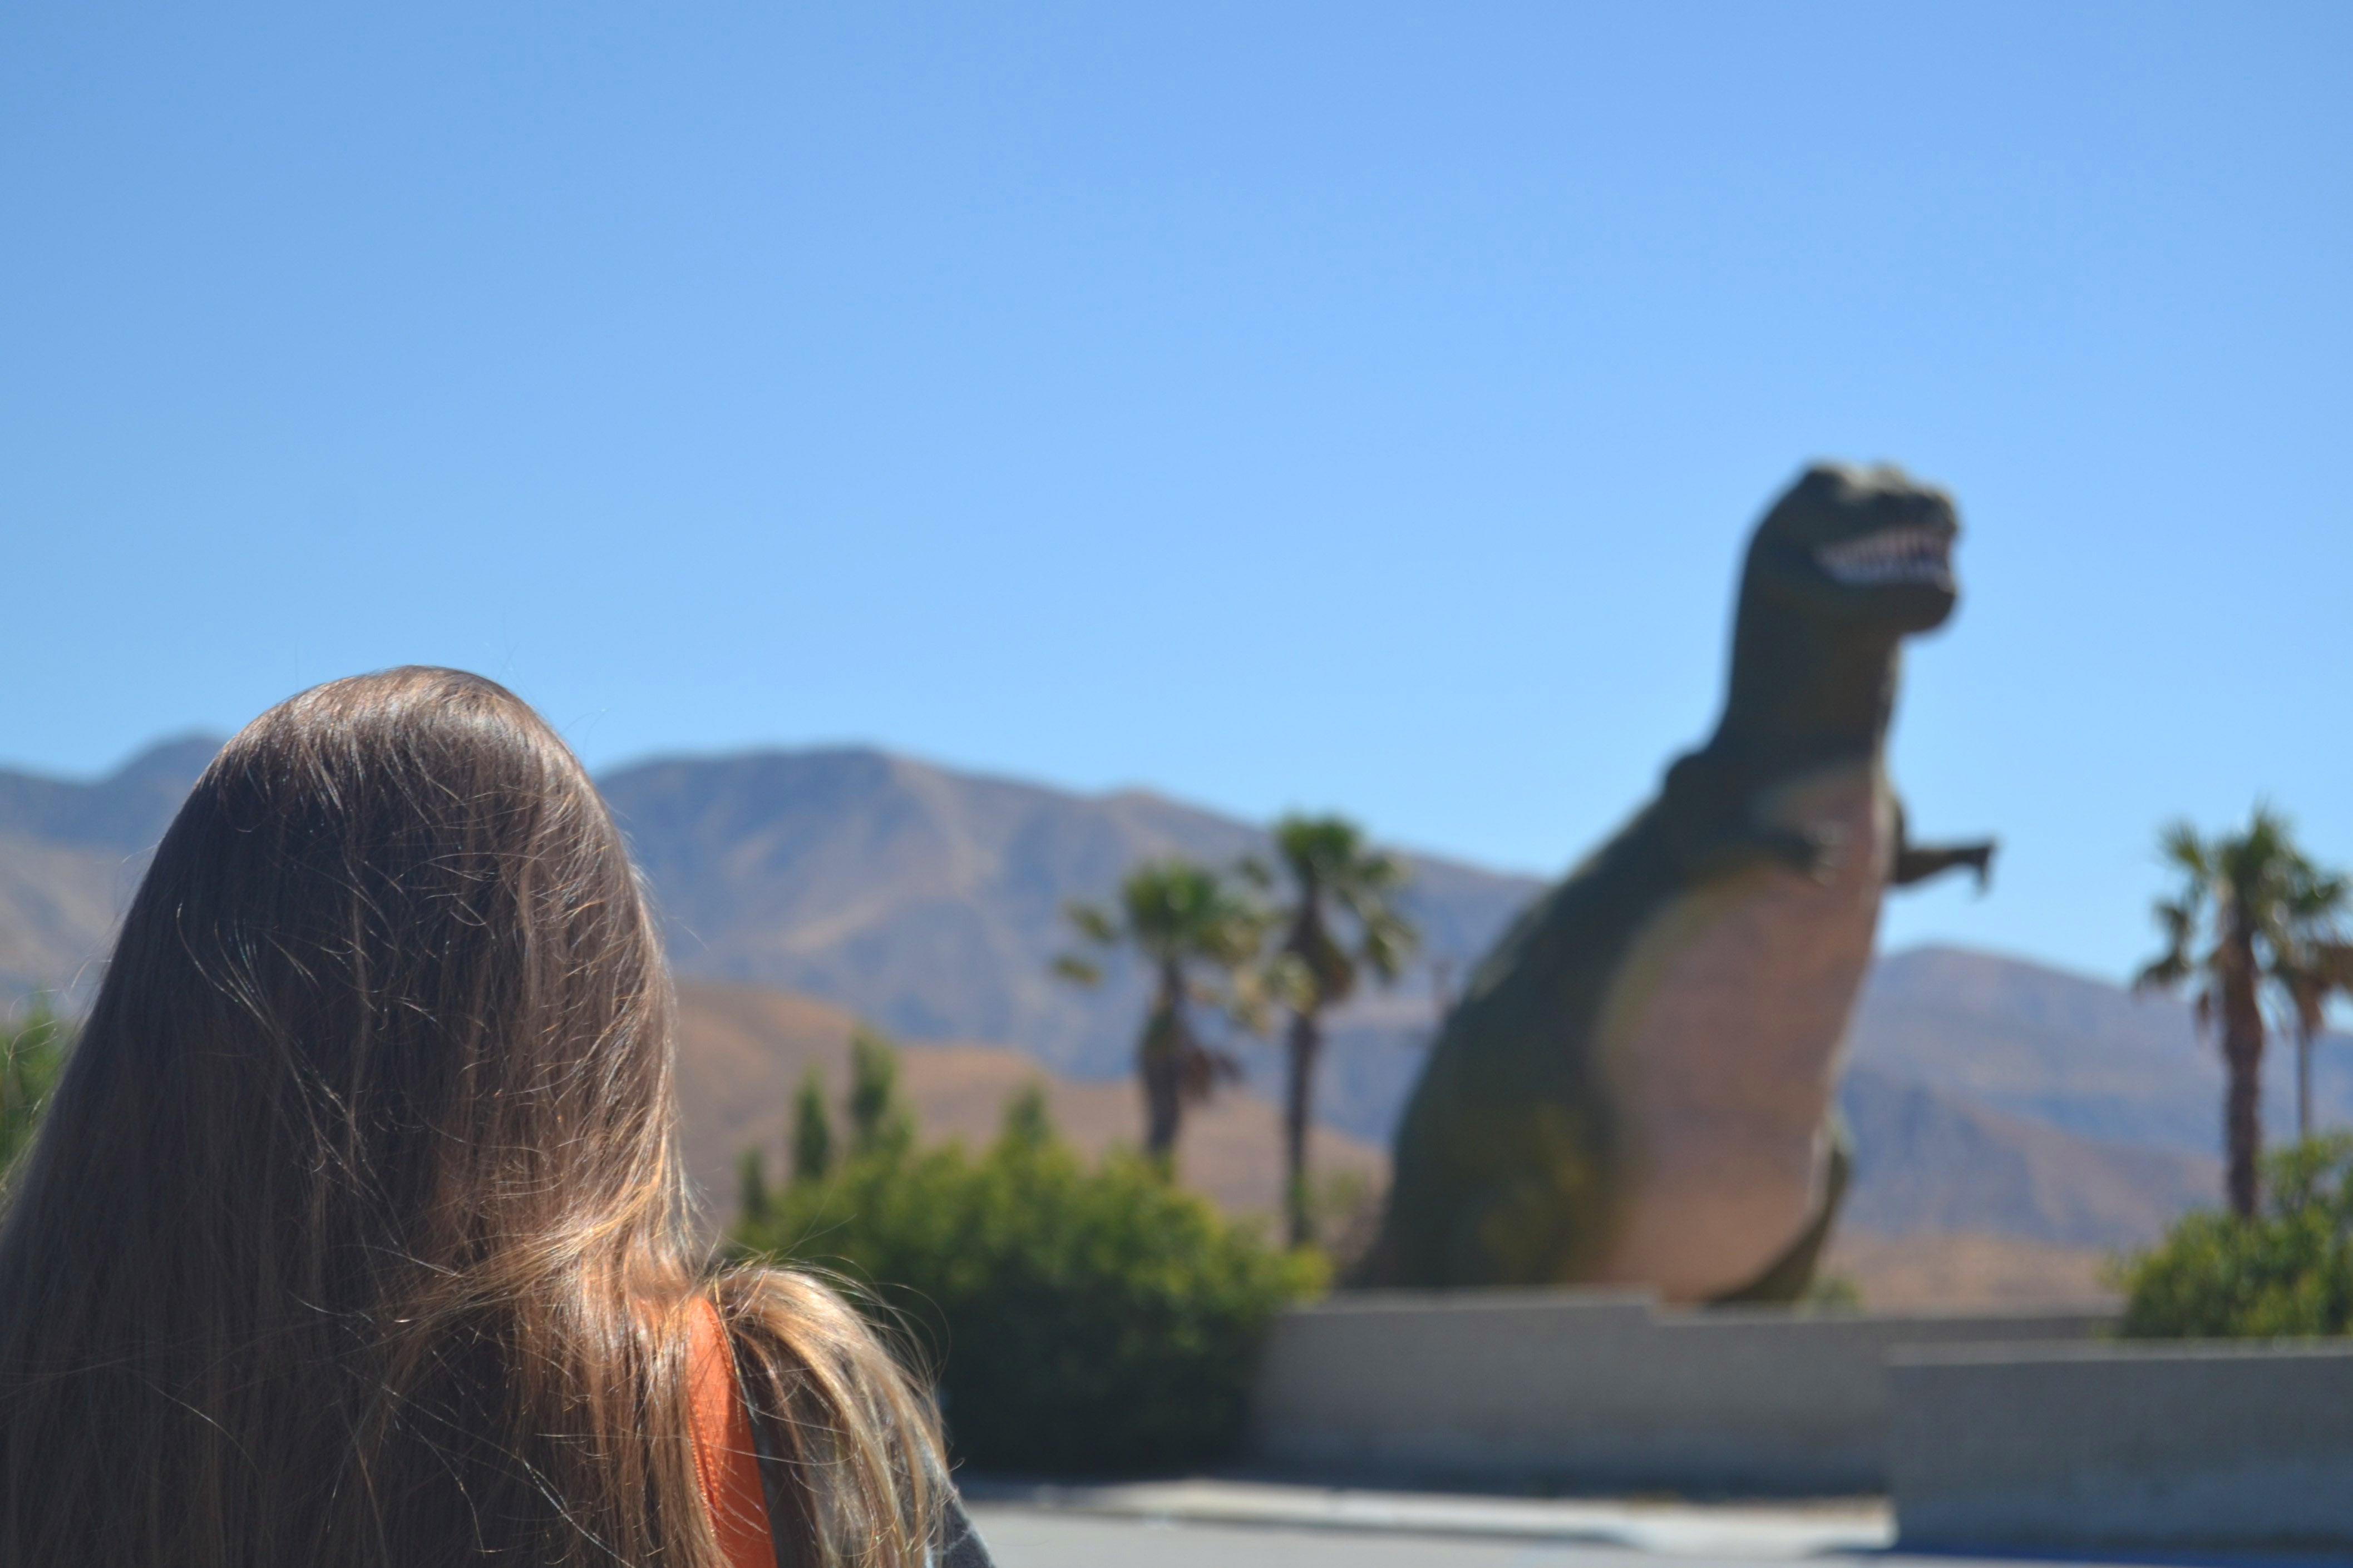 Image of the back of a woman's head, framing her looking at a life-size plastic dinosaur